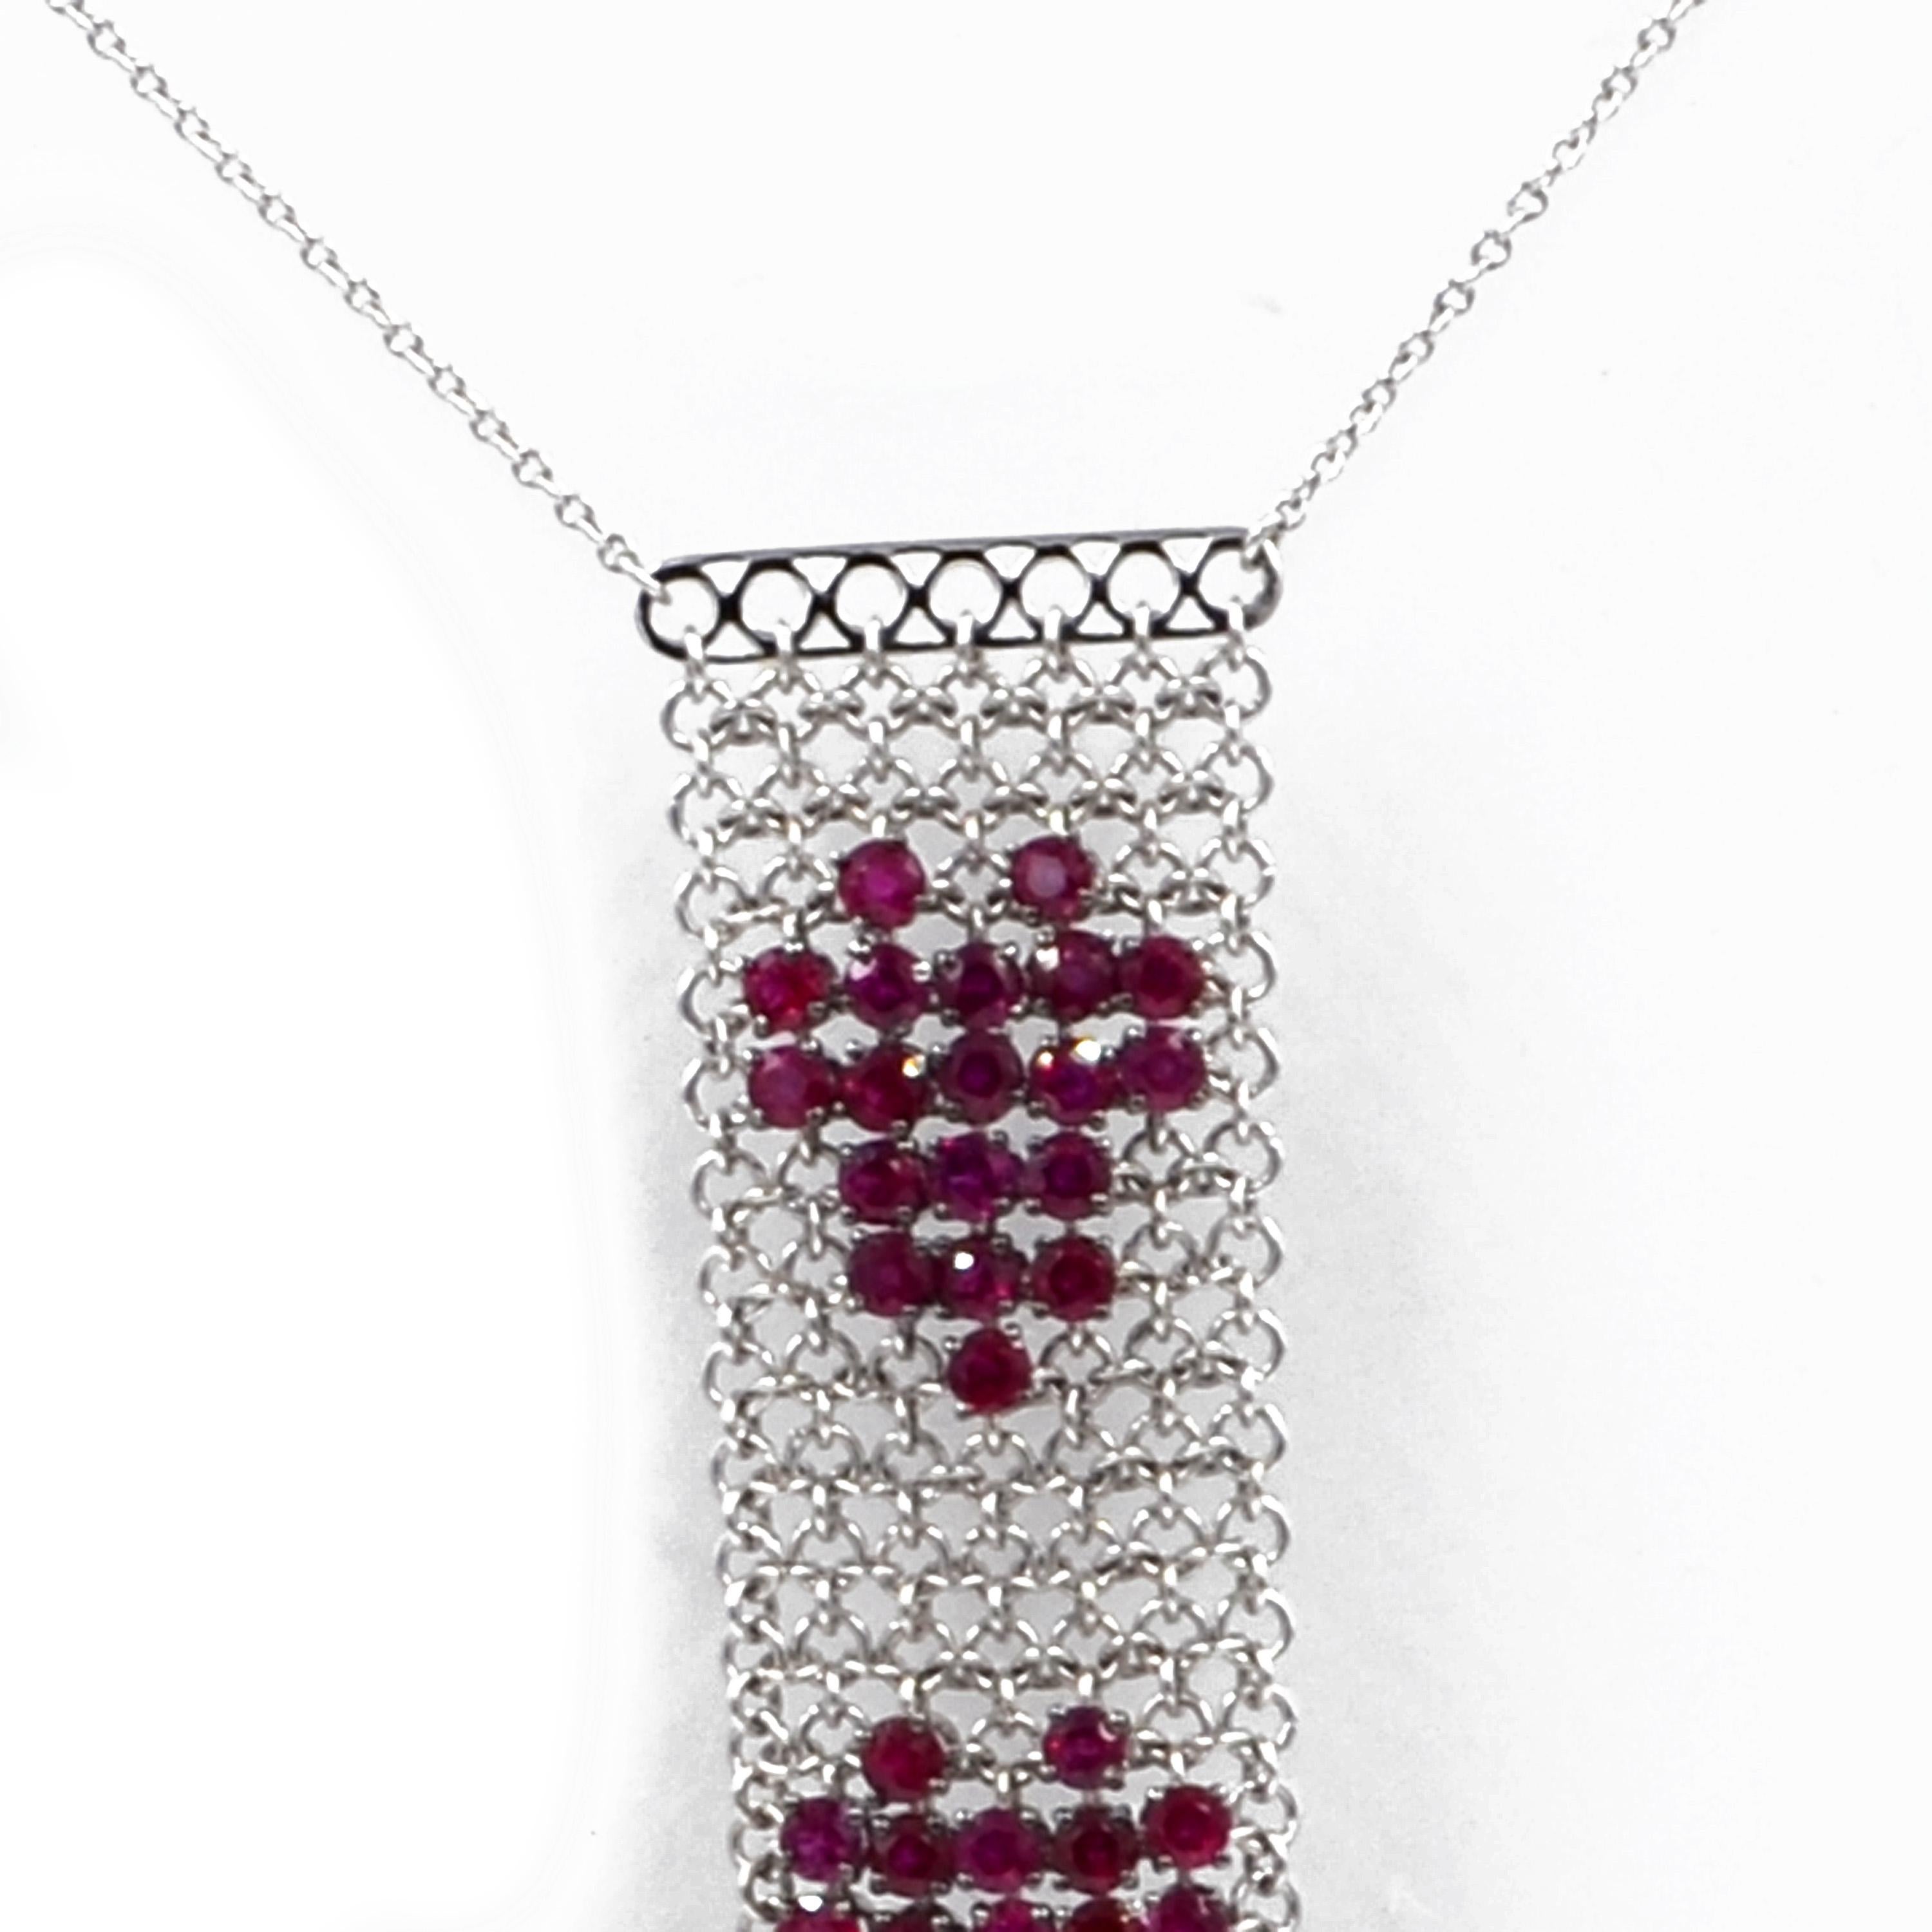 18KT White Gold Hand Made Mesh necklace with two hearts created by beautiful intense red color rubies. Made in Italy by Garavelli  
White diamonds dangling at the bottom of the mesh pendant.
Pendant size mm 85 lenght and 18 width.
Chain total lenght